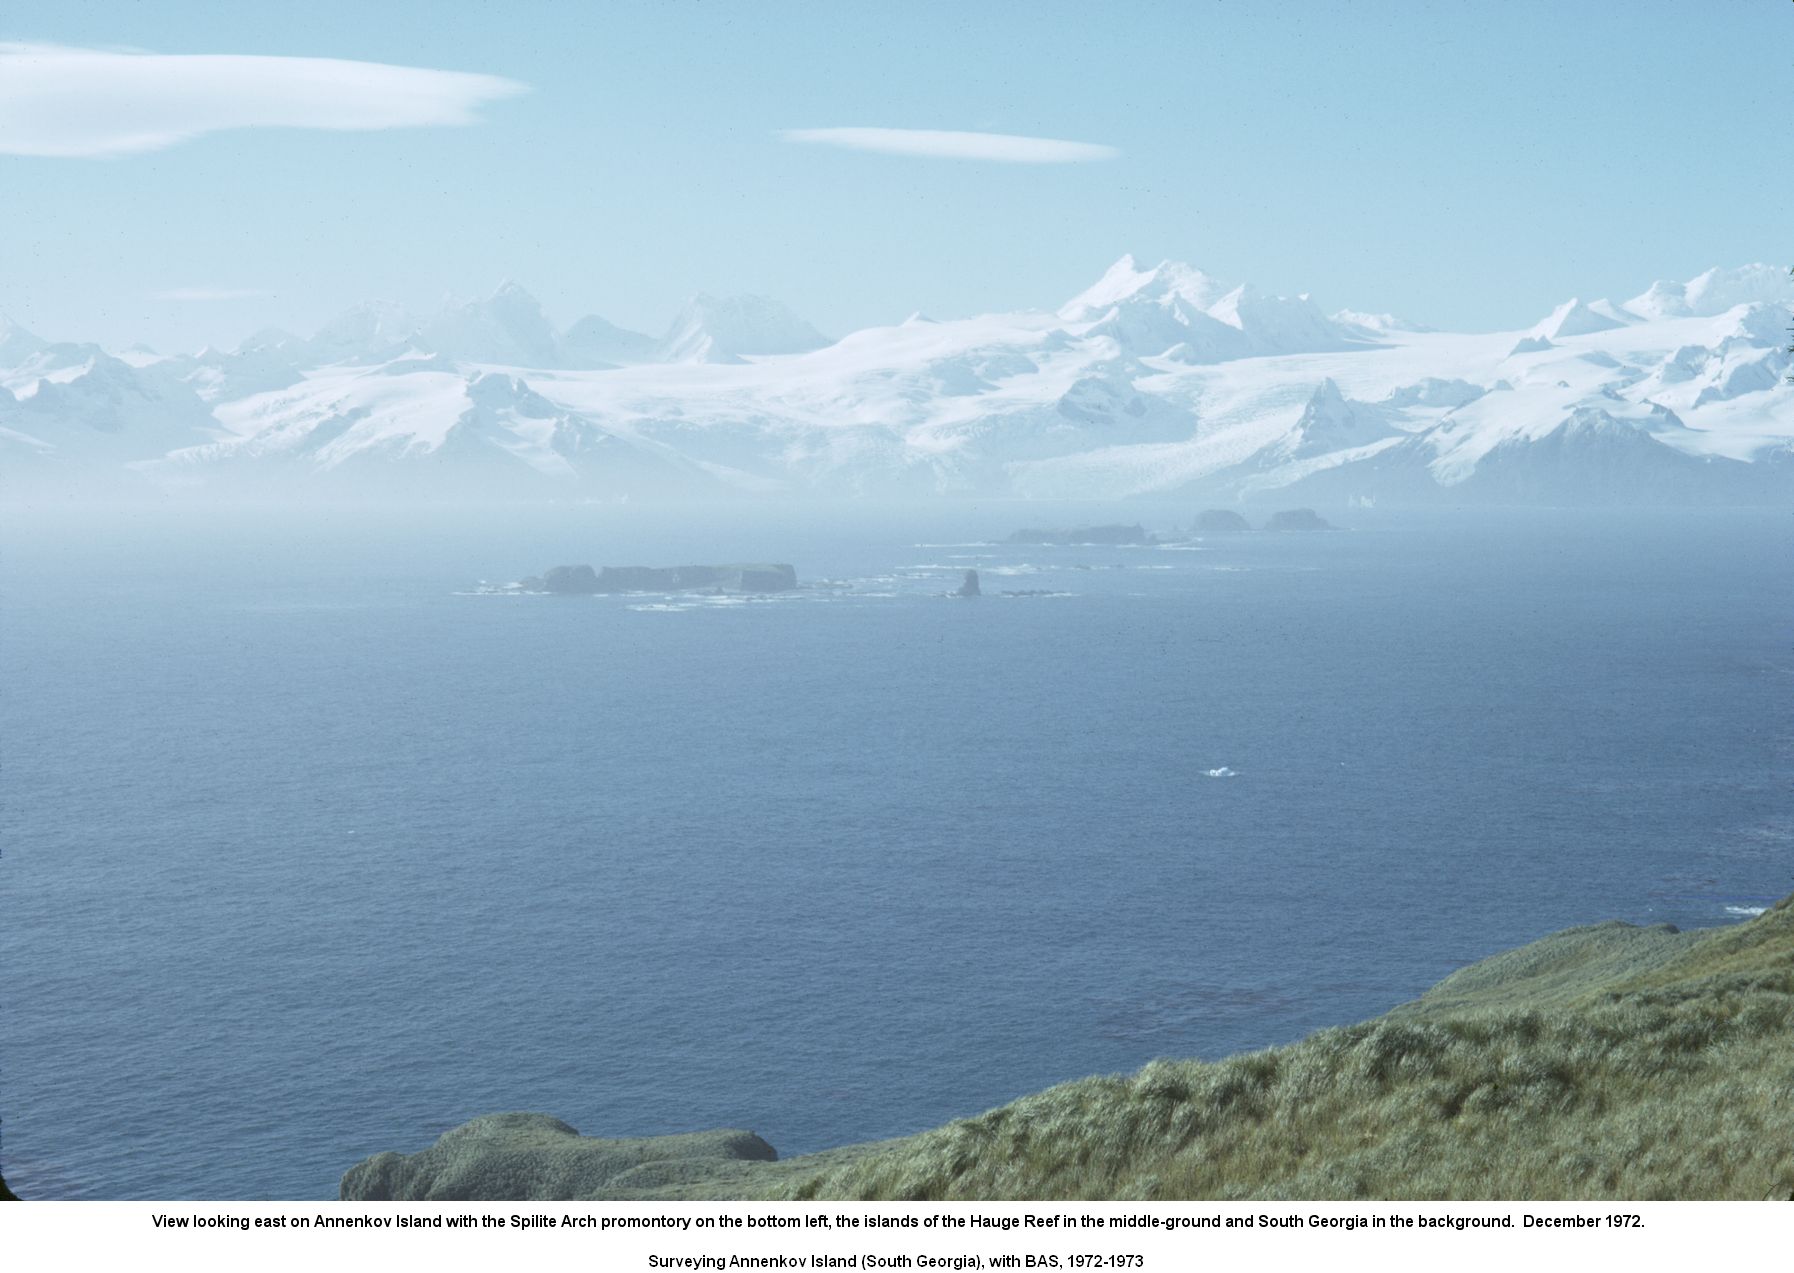 View looking east on Annenkov Island with the Spilite Arch promontory on the bottom left, the islands of the Hauge Reef in the middle-ground and South Georgia in the background.  December 1972.